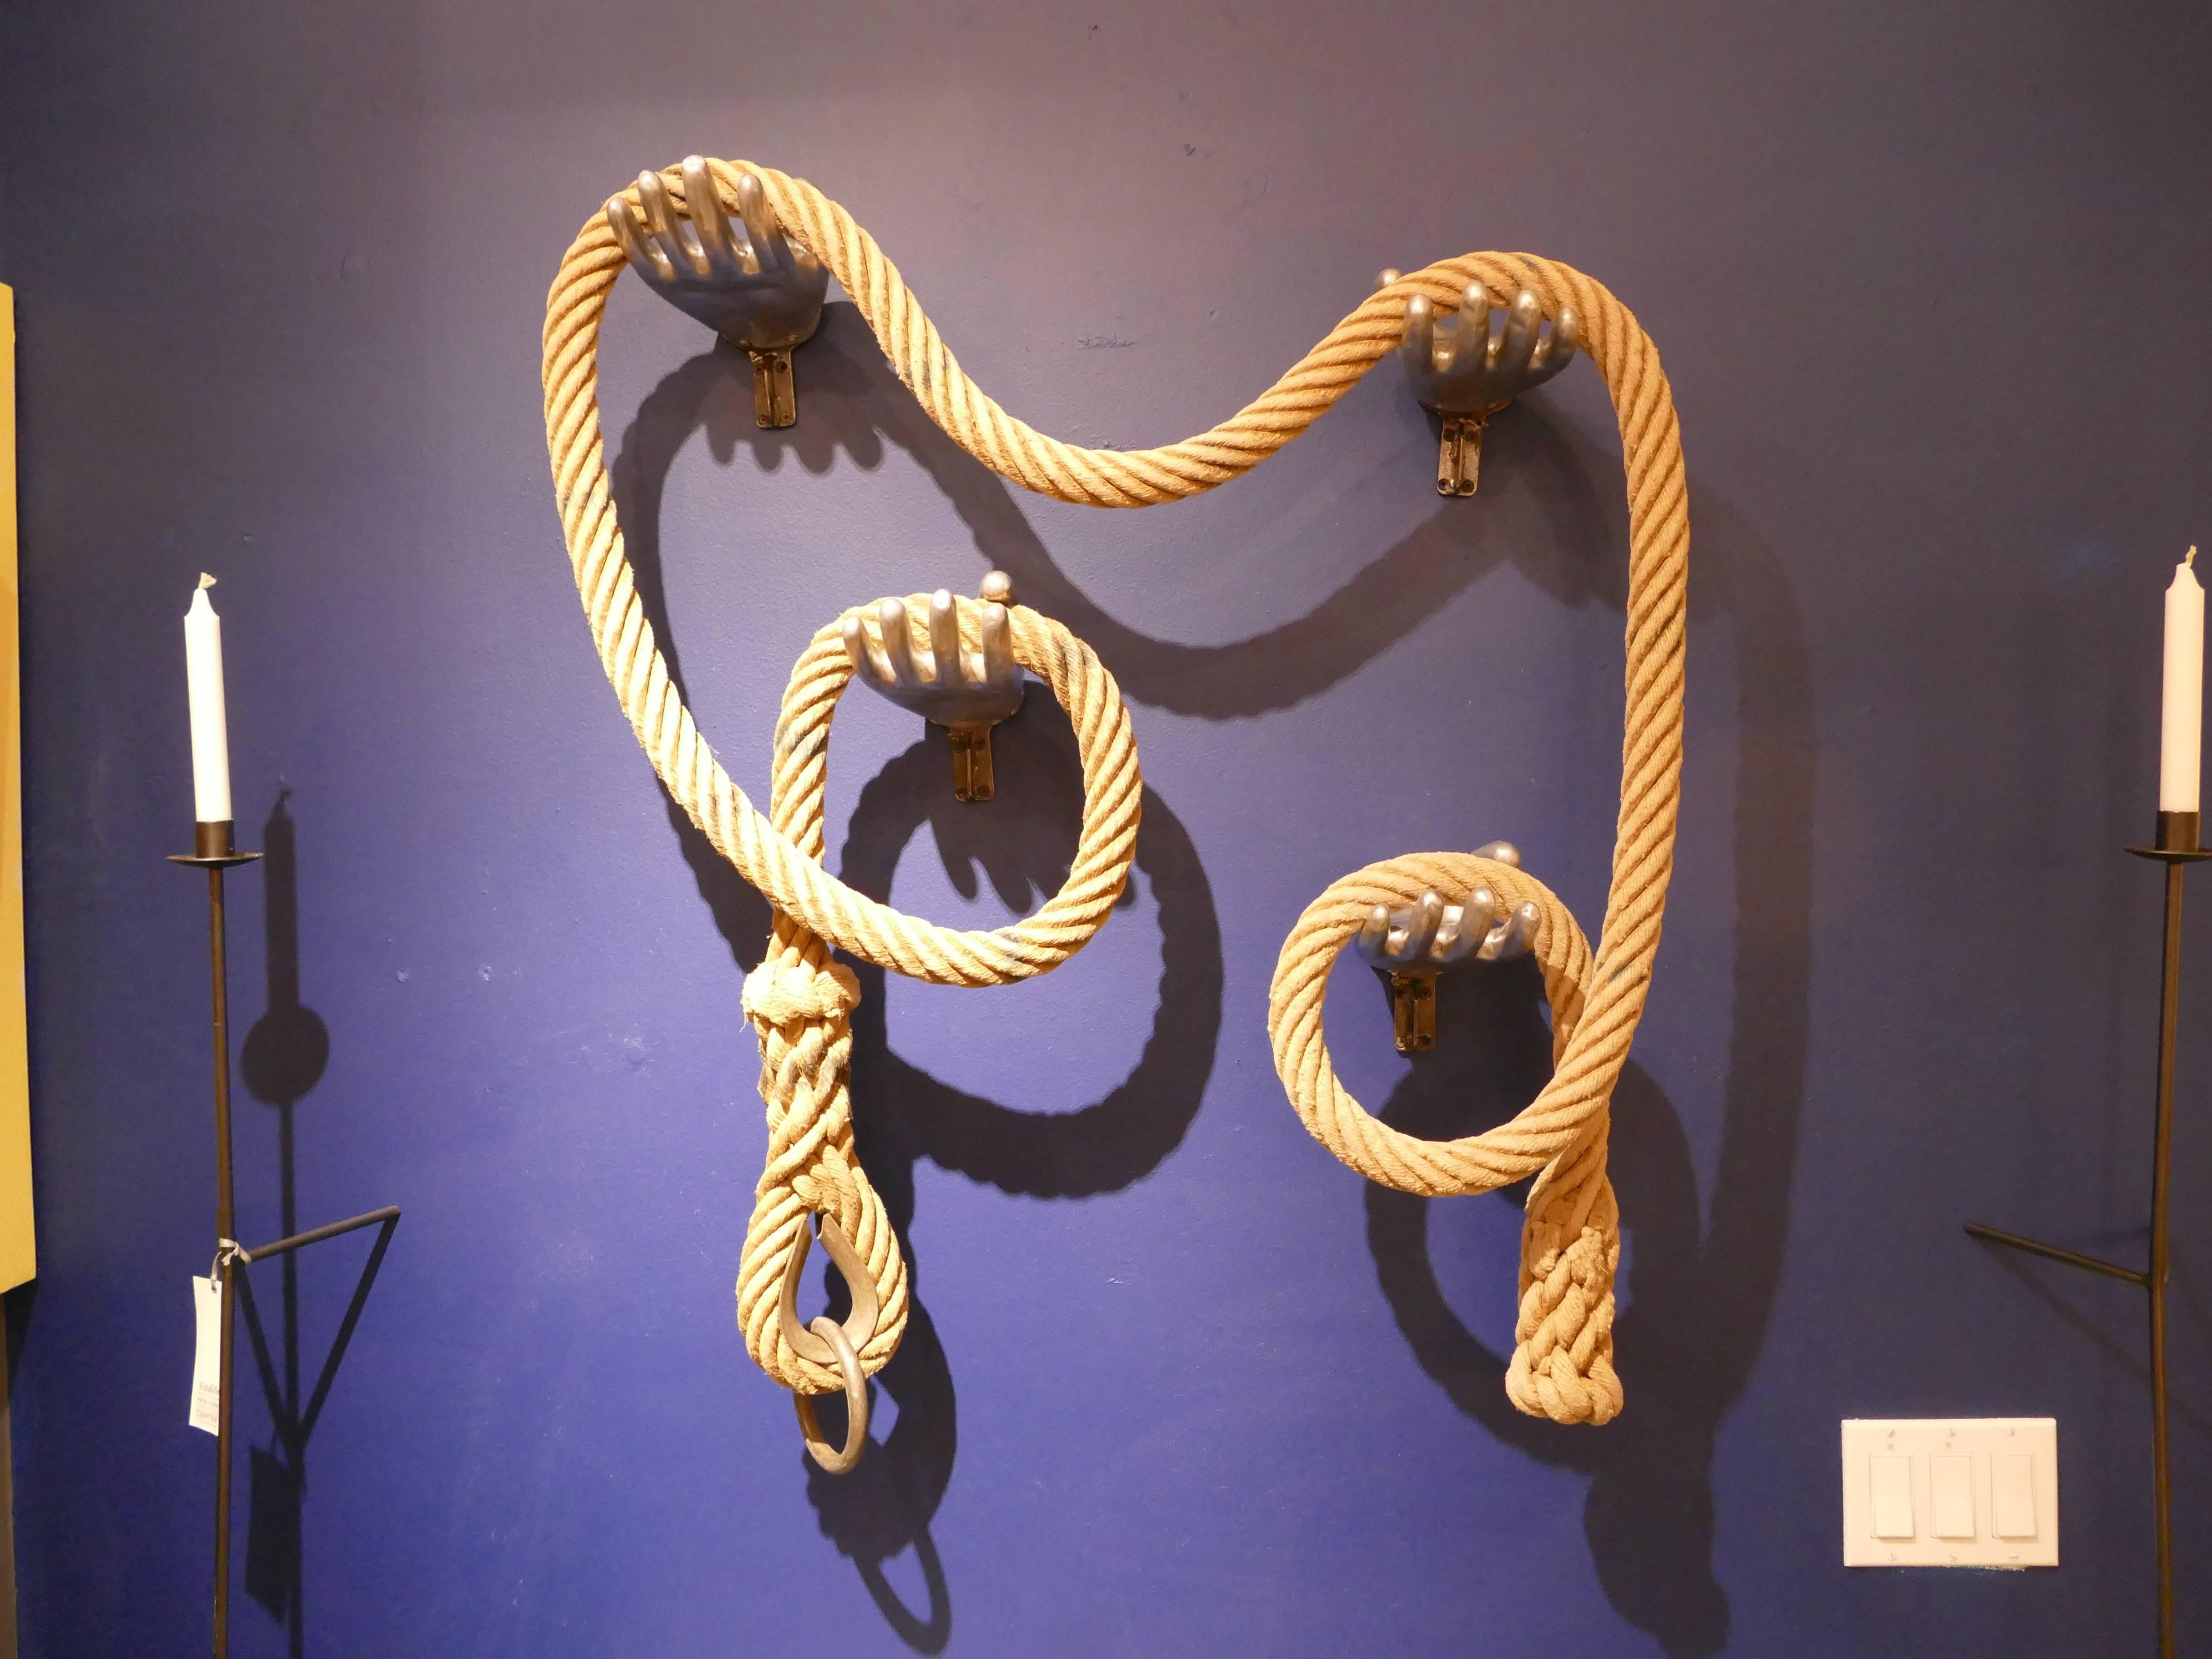 Created from four vintage aluminium glove molds and a vintage gymnasium rope, we have created this unique wall sculpture. The rope can be moved to endless configurations. I unique look. The rope and molds are from the 1940s.